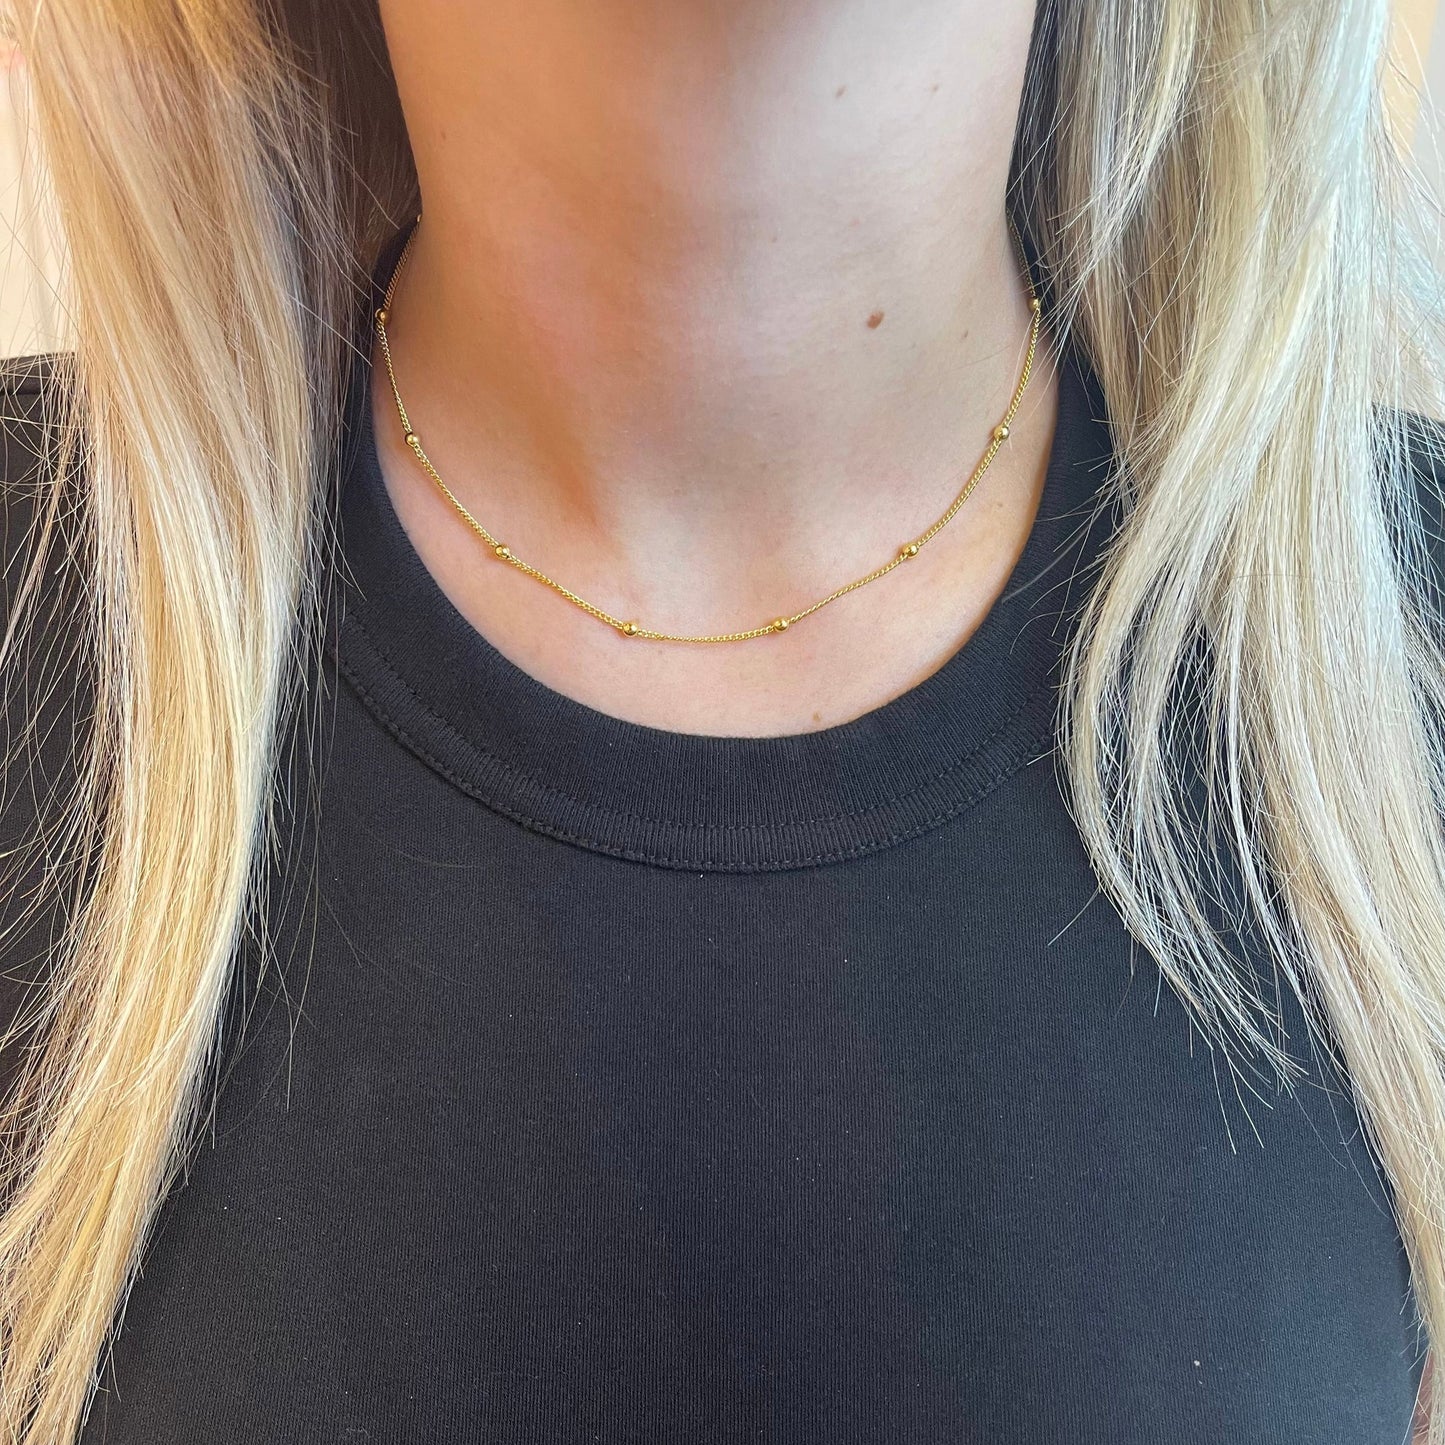 Little Balls Choker Necklace Chain 15"  Inches | 18k Gold Plated